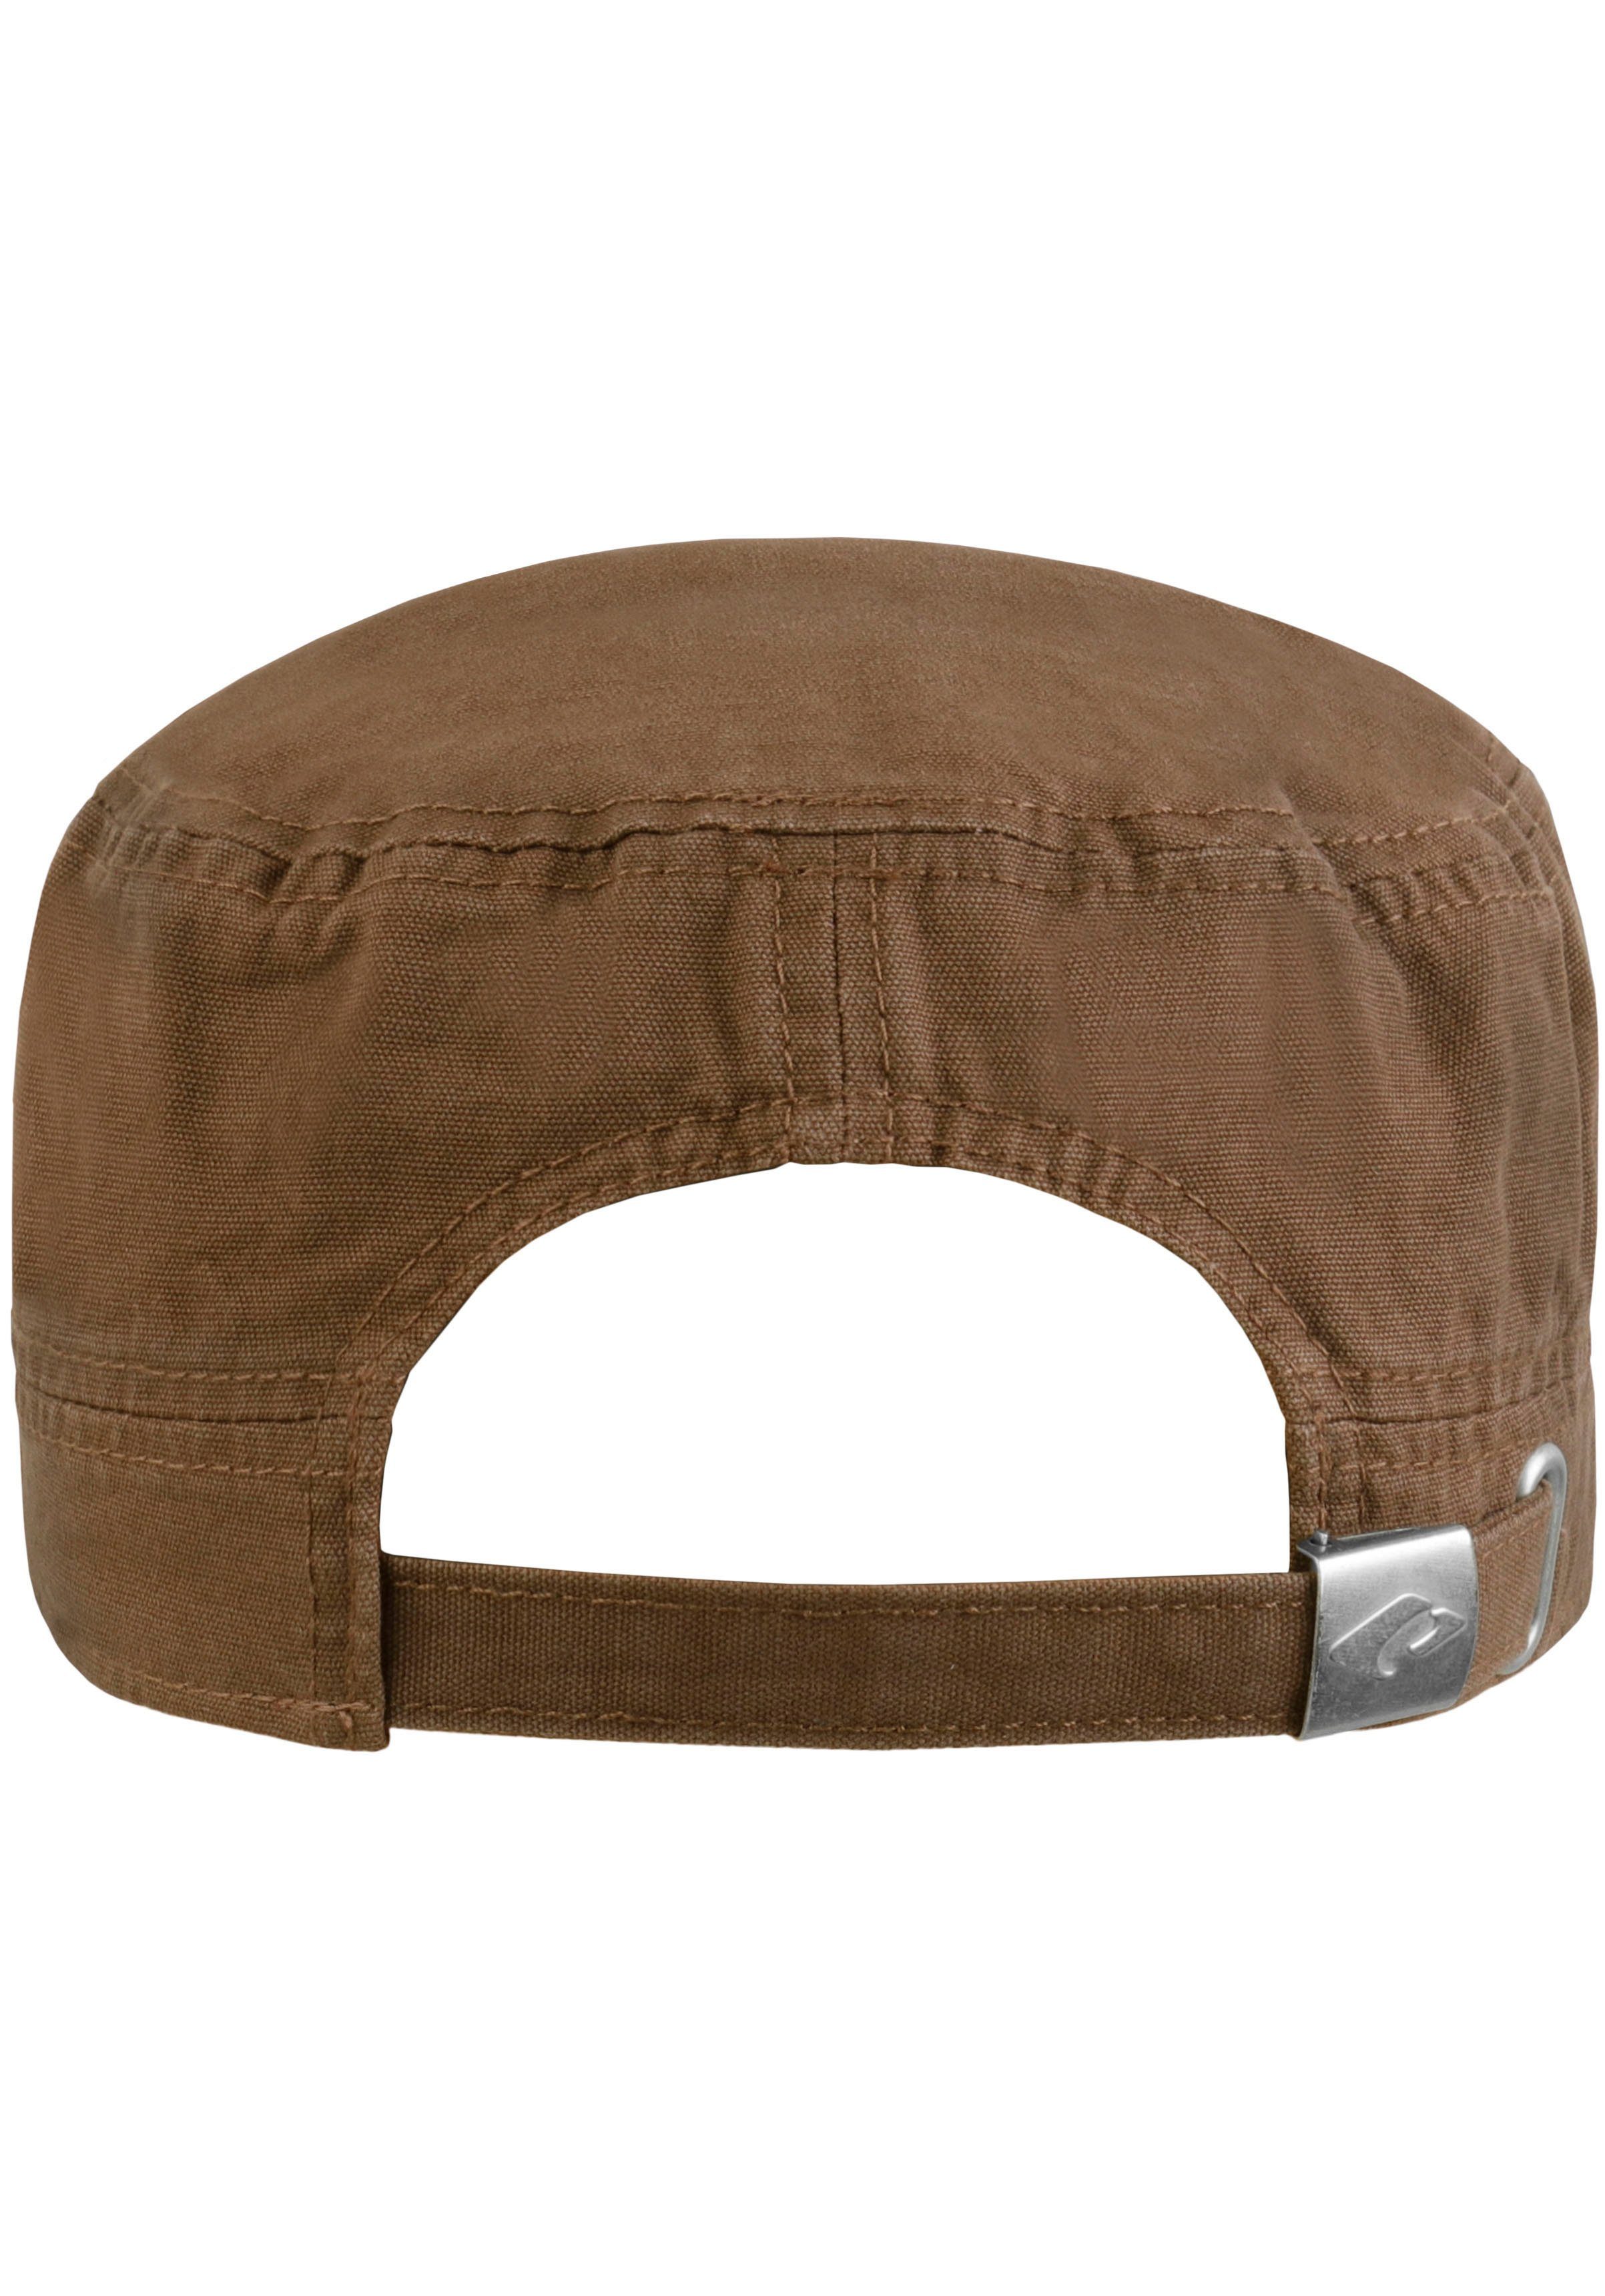 Dublin Cap braun Mililtary-Style Hat Cap chillouts Army im